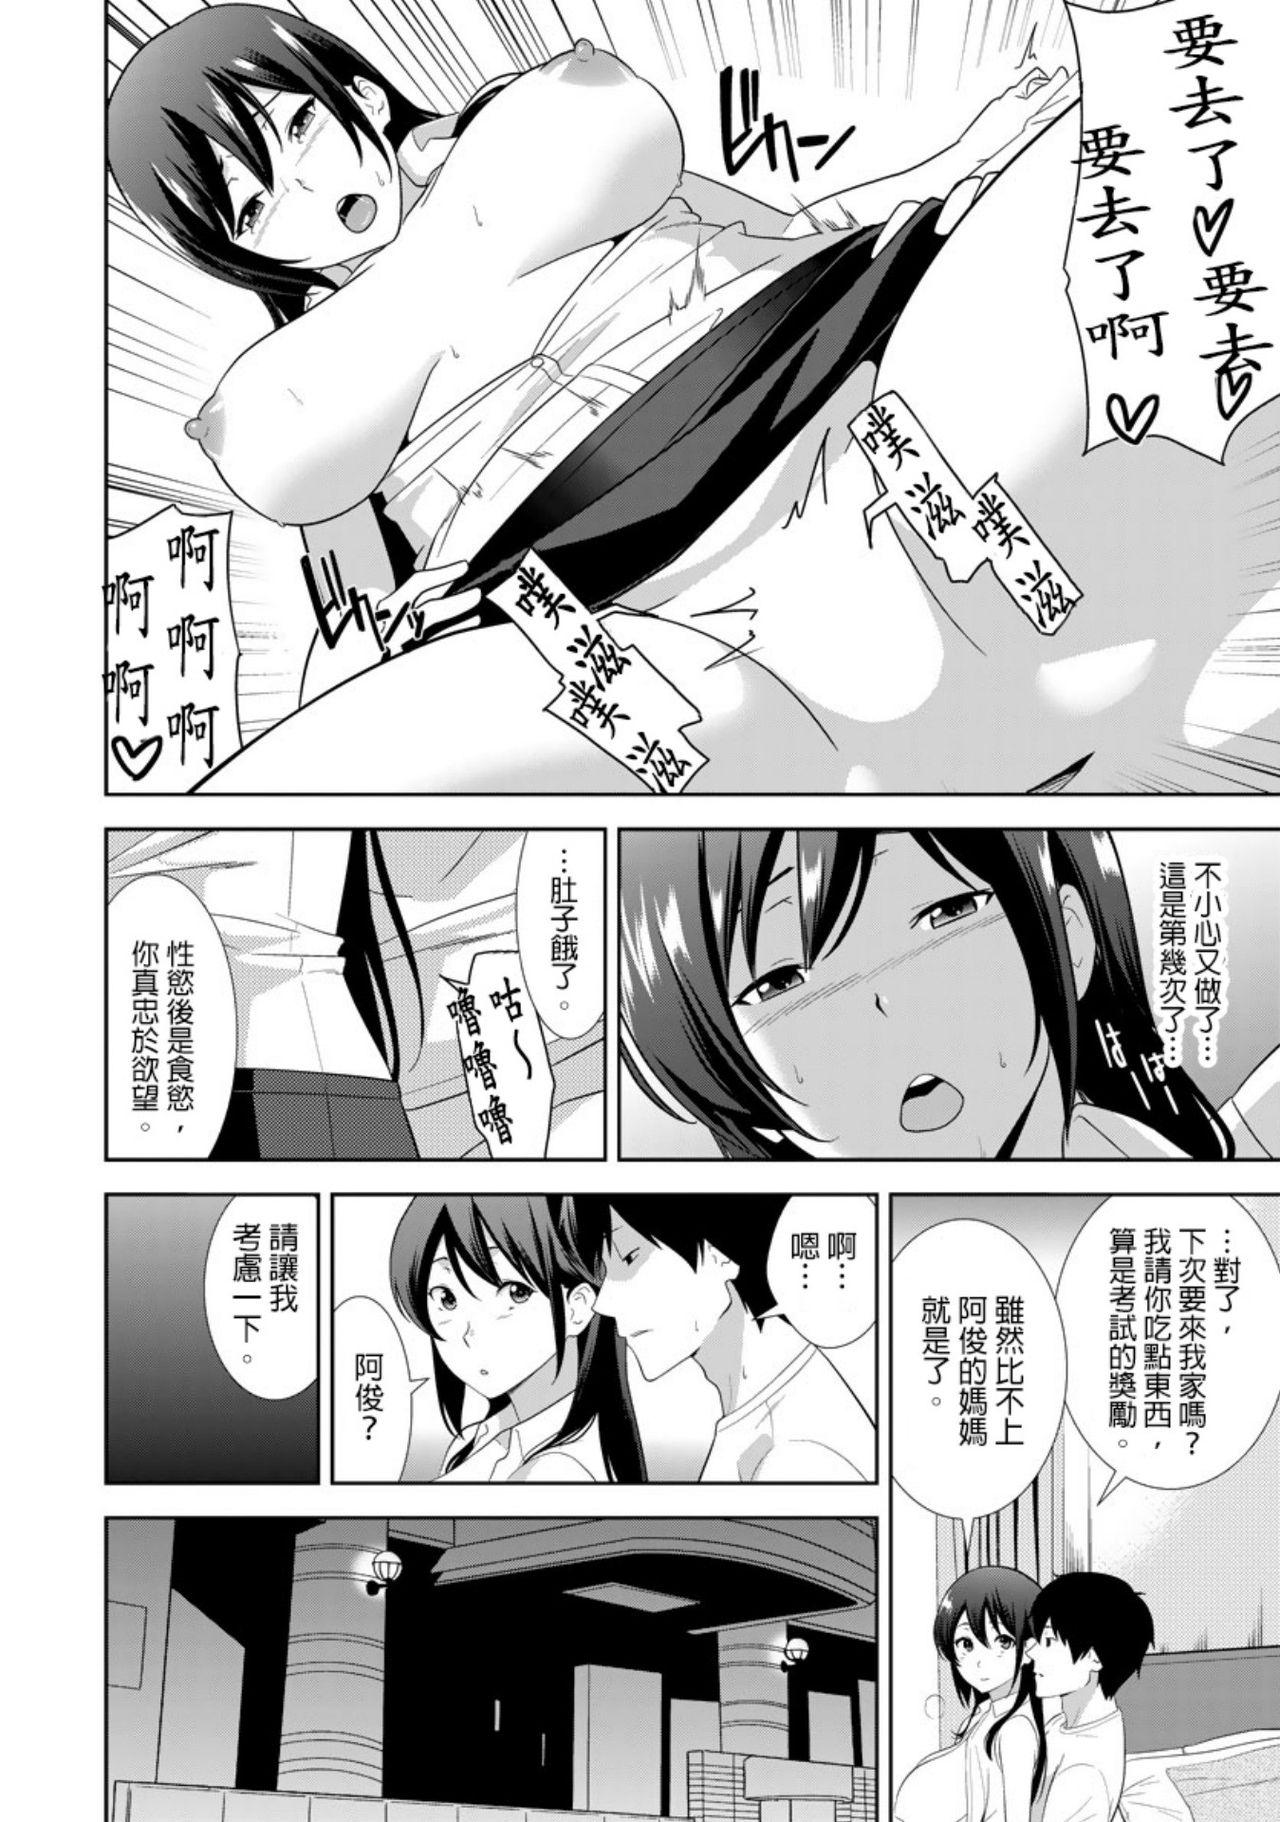 Female Domination 教え子に襲ワレル人妻は抵抗できなくて Ch.4 Cutie - Page 13